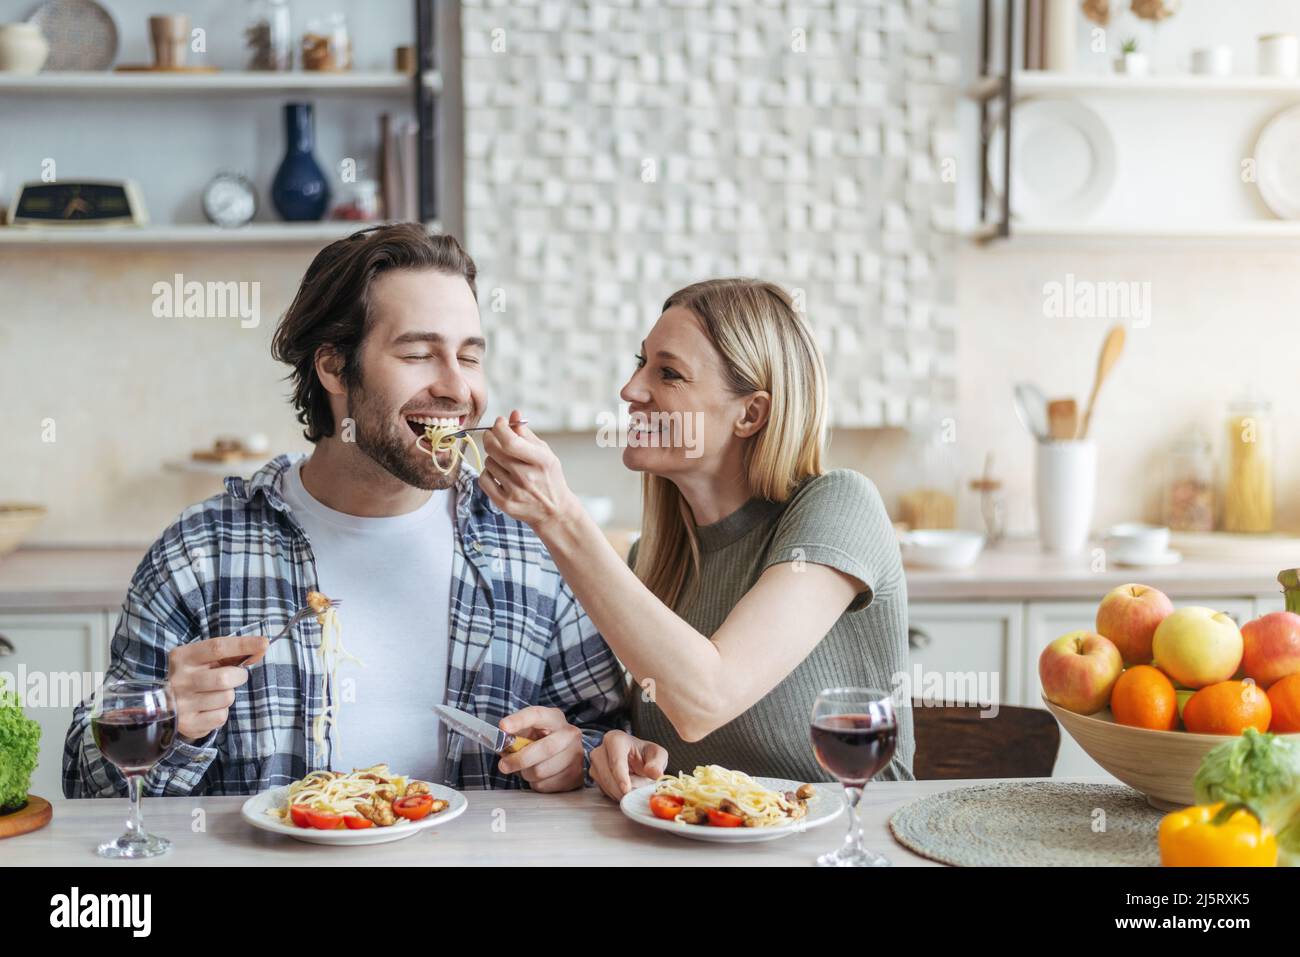 Cheerful young european woman feeds her husband of spaghetti with vegetables or pasta in minimalist kitchen Stock Photo